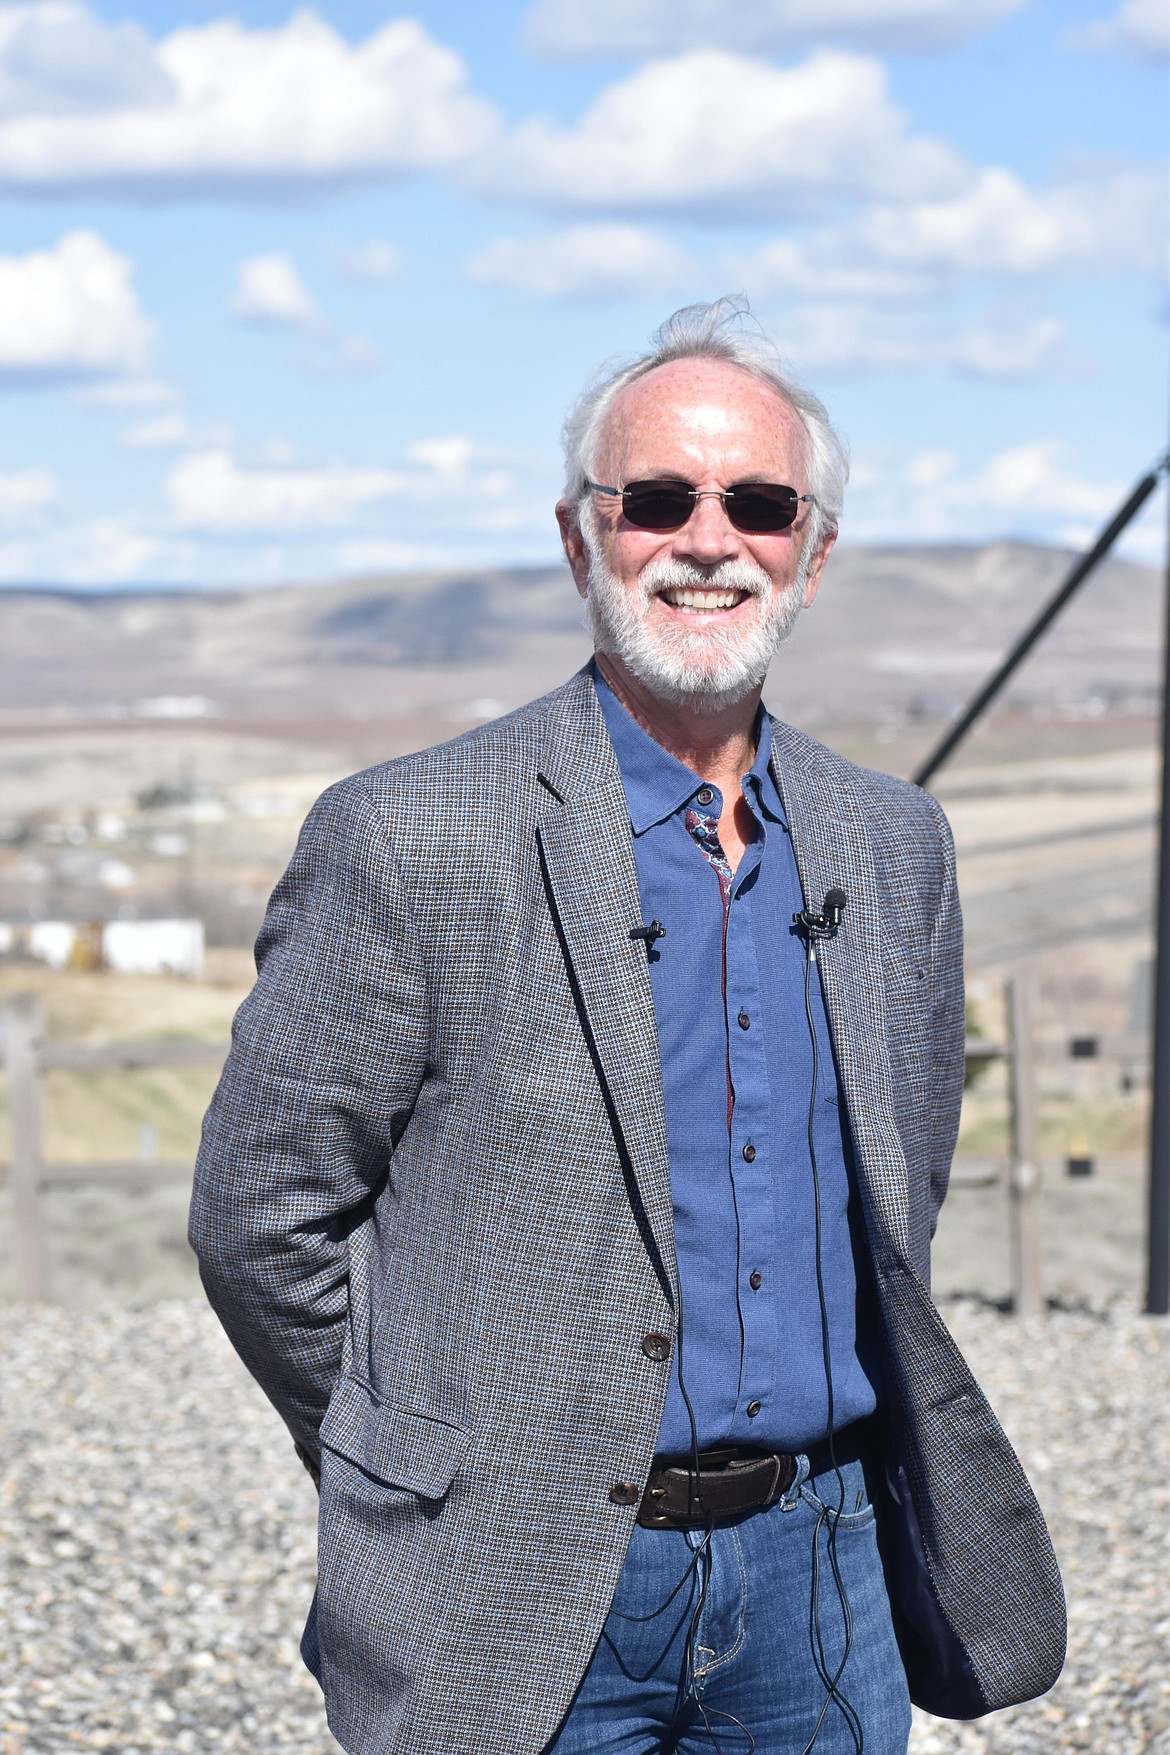 Rep. Dan Newhouse, R-Yakima, serves as a Congressman for Washington State and is on the Subcommittee on Agriculture, Rural Development, and Food and Drug Administration and the Subcommittee on Energy and Water Development.